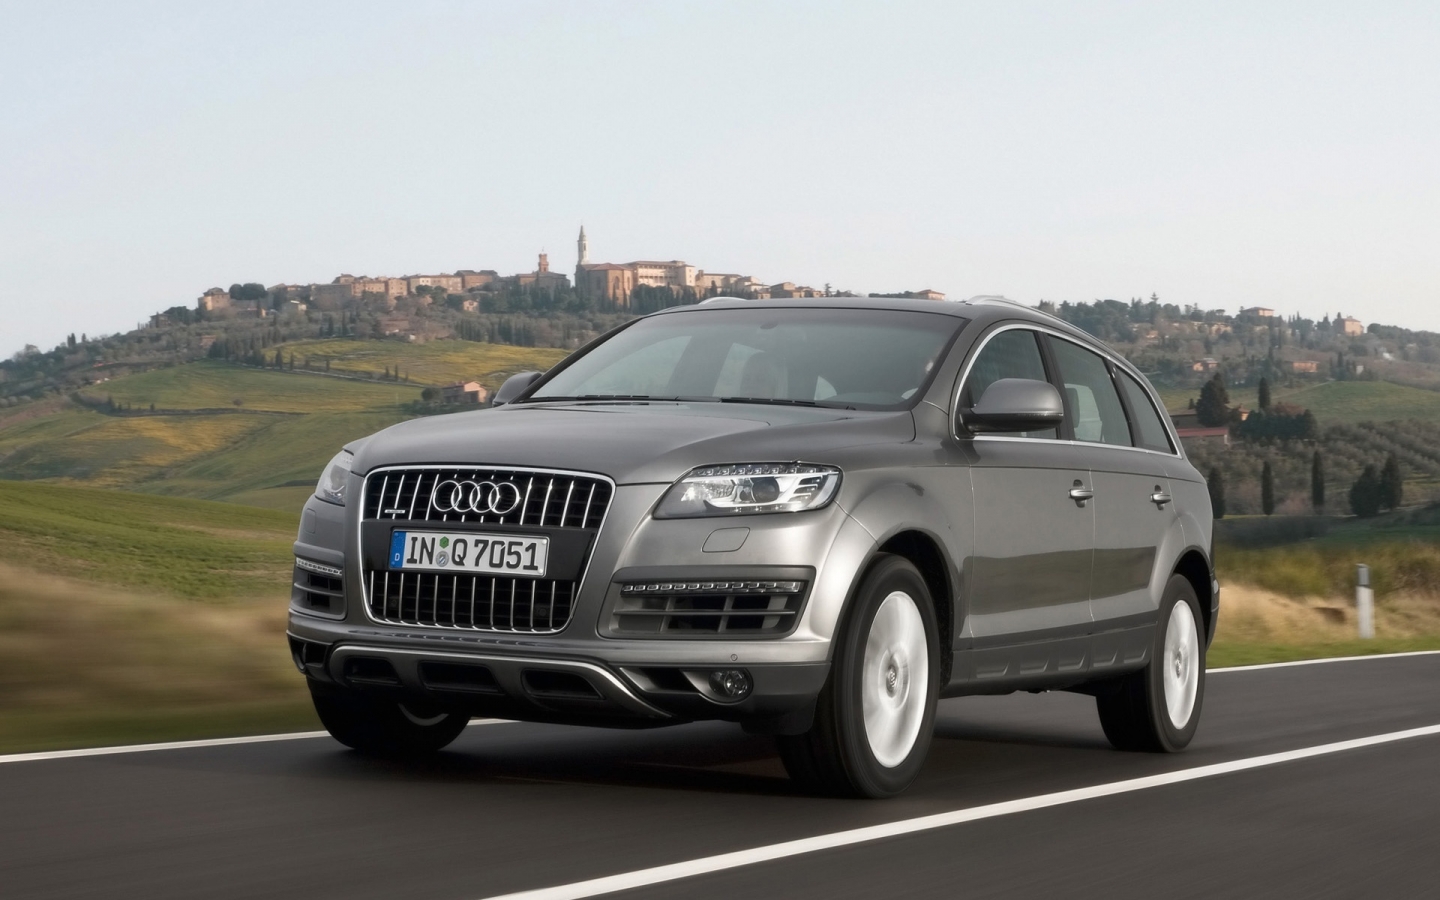 2009 Audi Q7 - Grey Front Angle Speed 1 for 1440 x 900 widescreen resolution